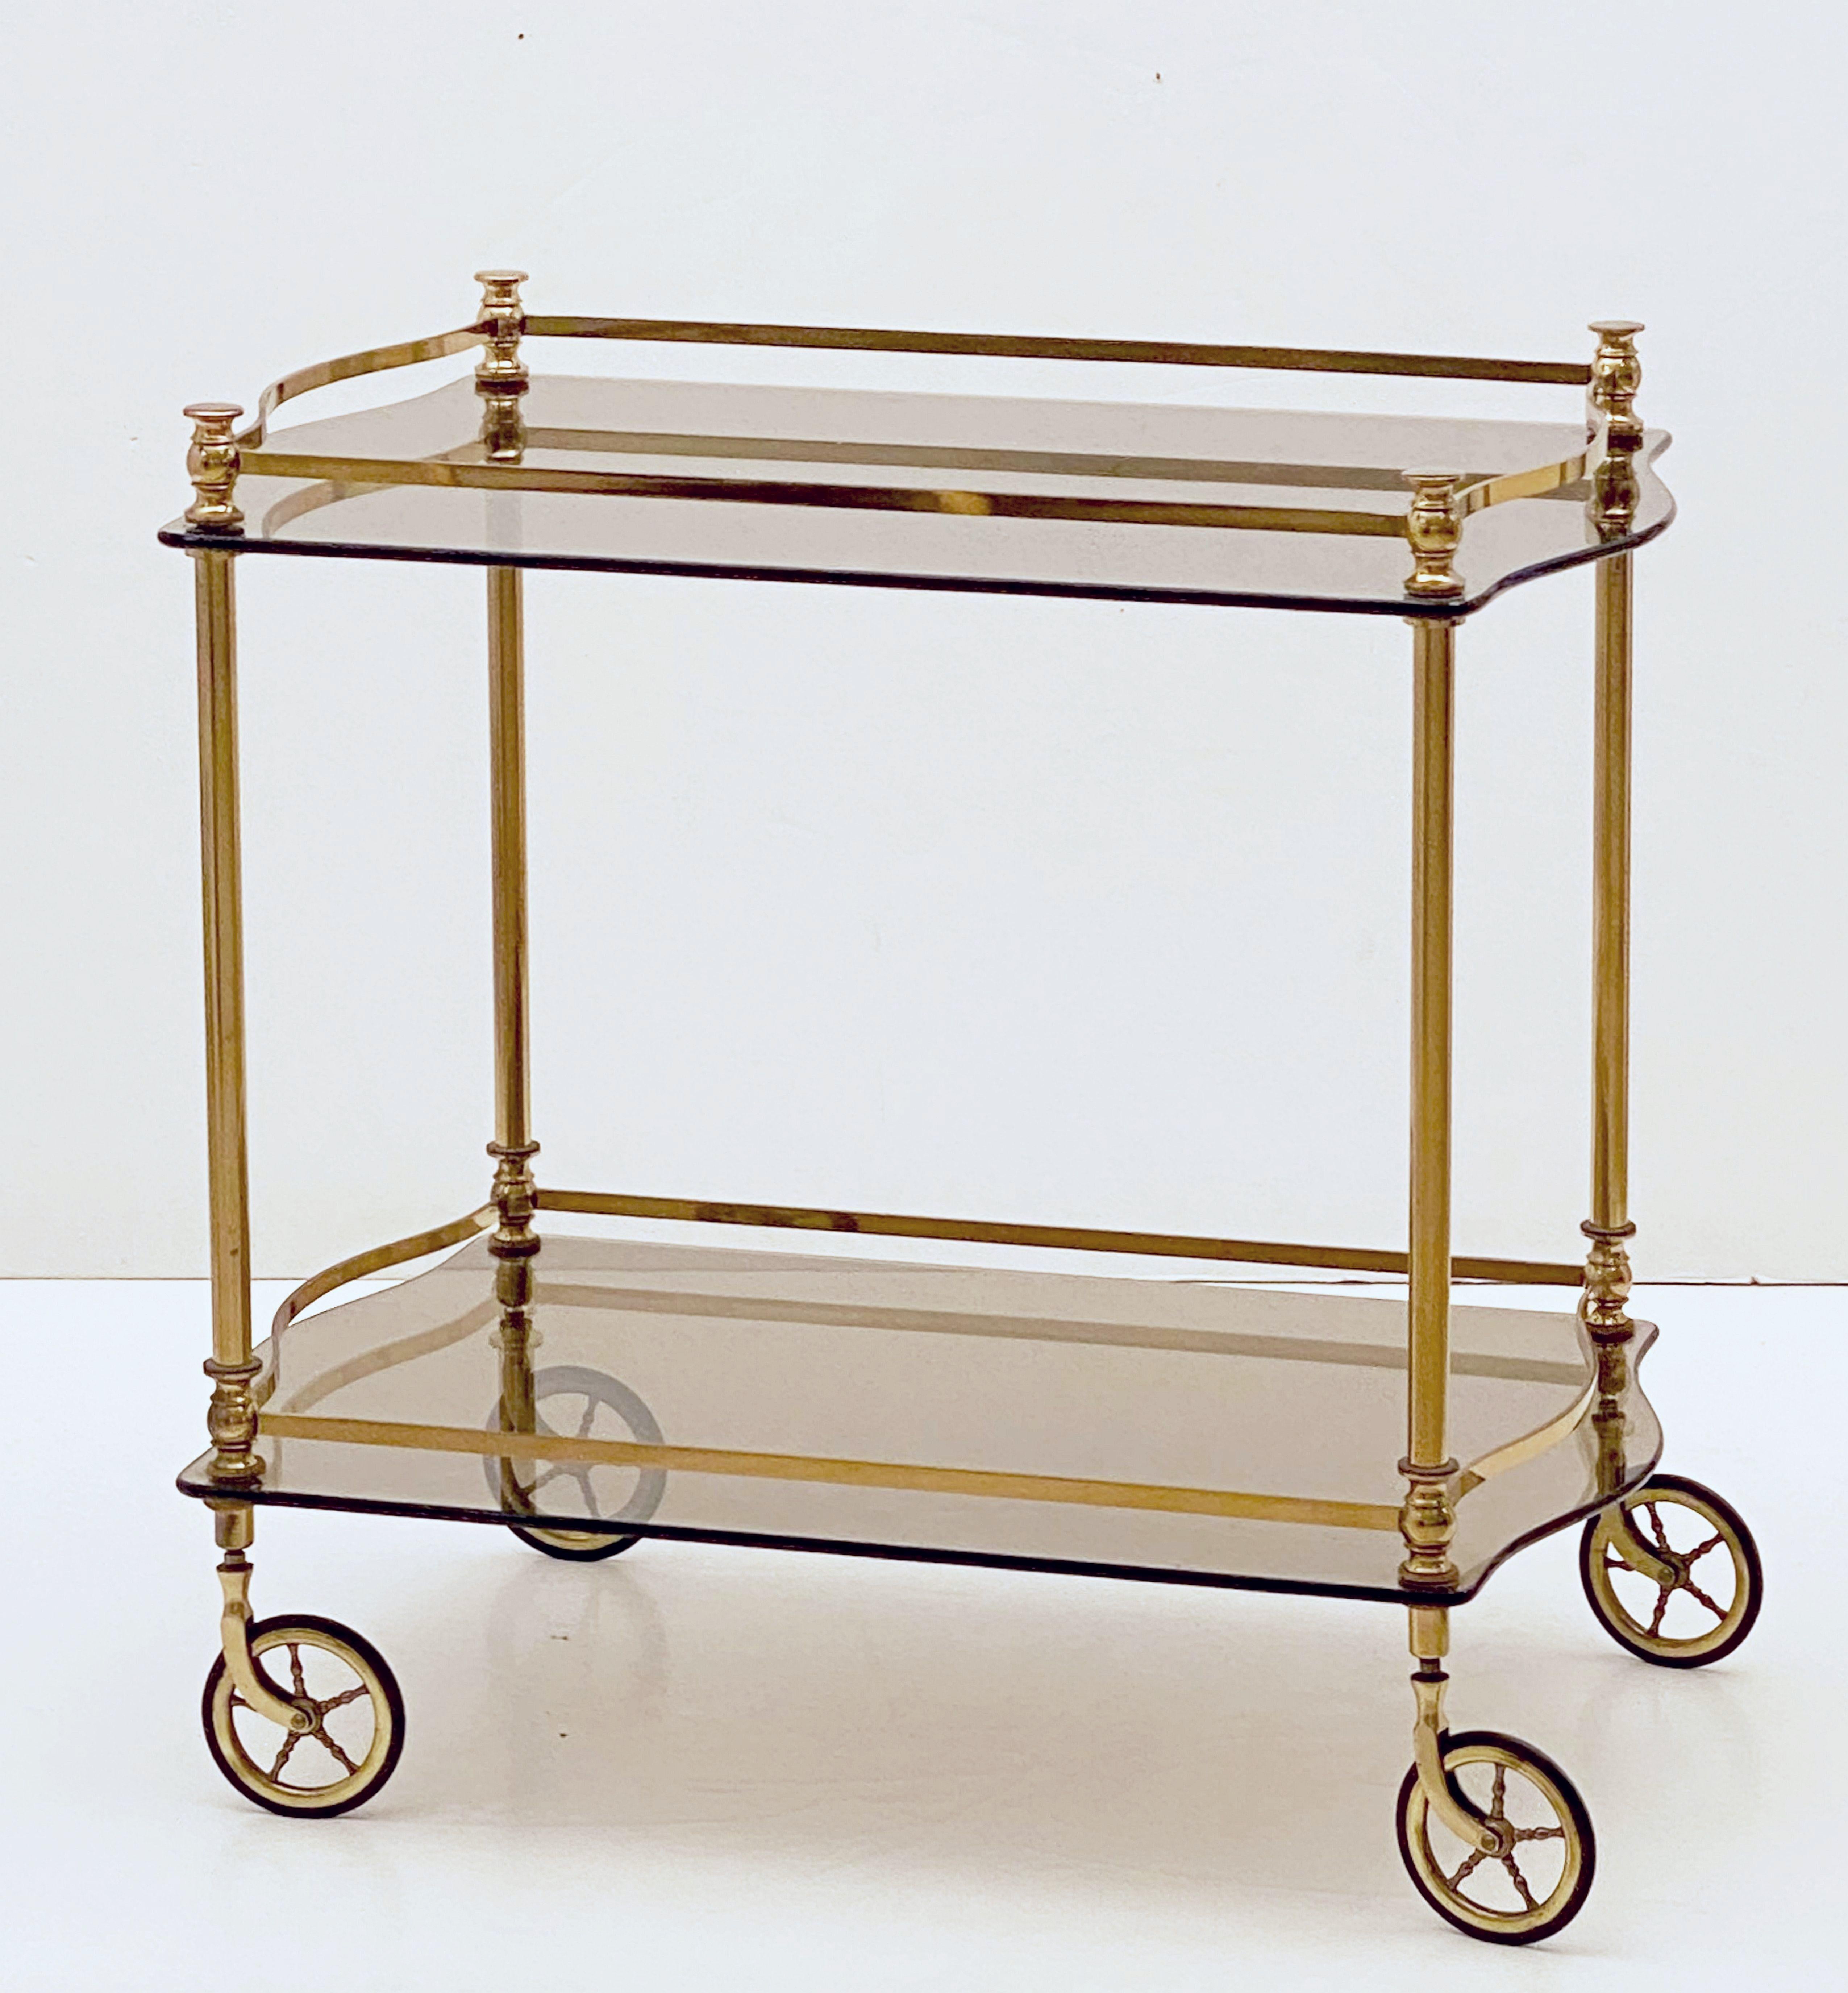 A handsome vintage French rectangular bar cart table or serving trolley for drinks in brass, featuring two tinted glass tiers, each tier with stylish serpentine gallery, resting on rolling spoked caster wheels. 

Perfect for use as a side or end